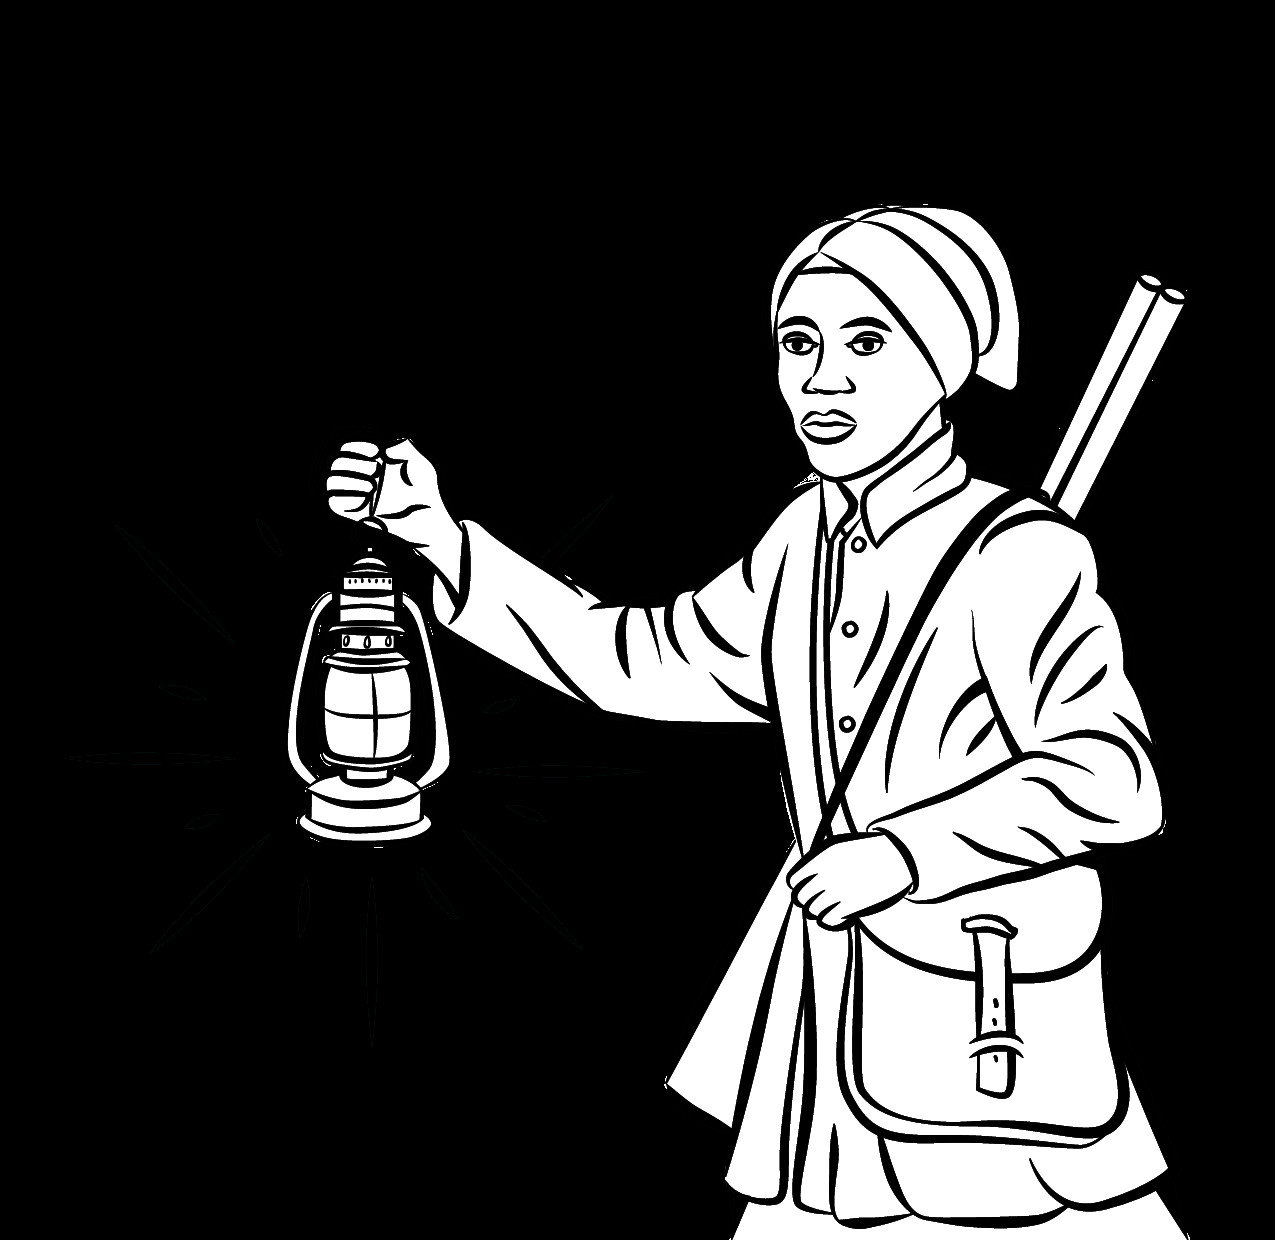 Harriet Tubman Free Coloring Sheets
 Harriet Tubman Free Colouring Page Links & Resources